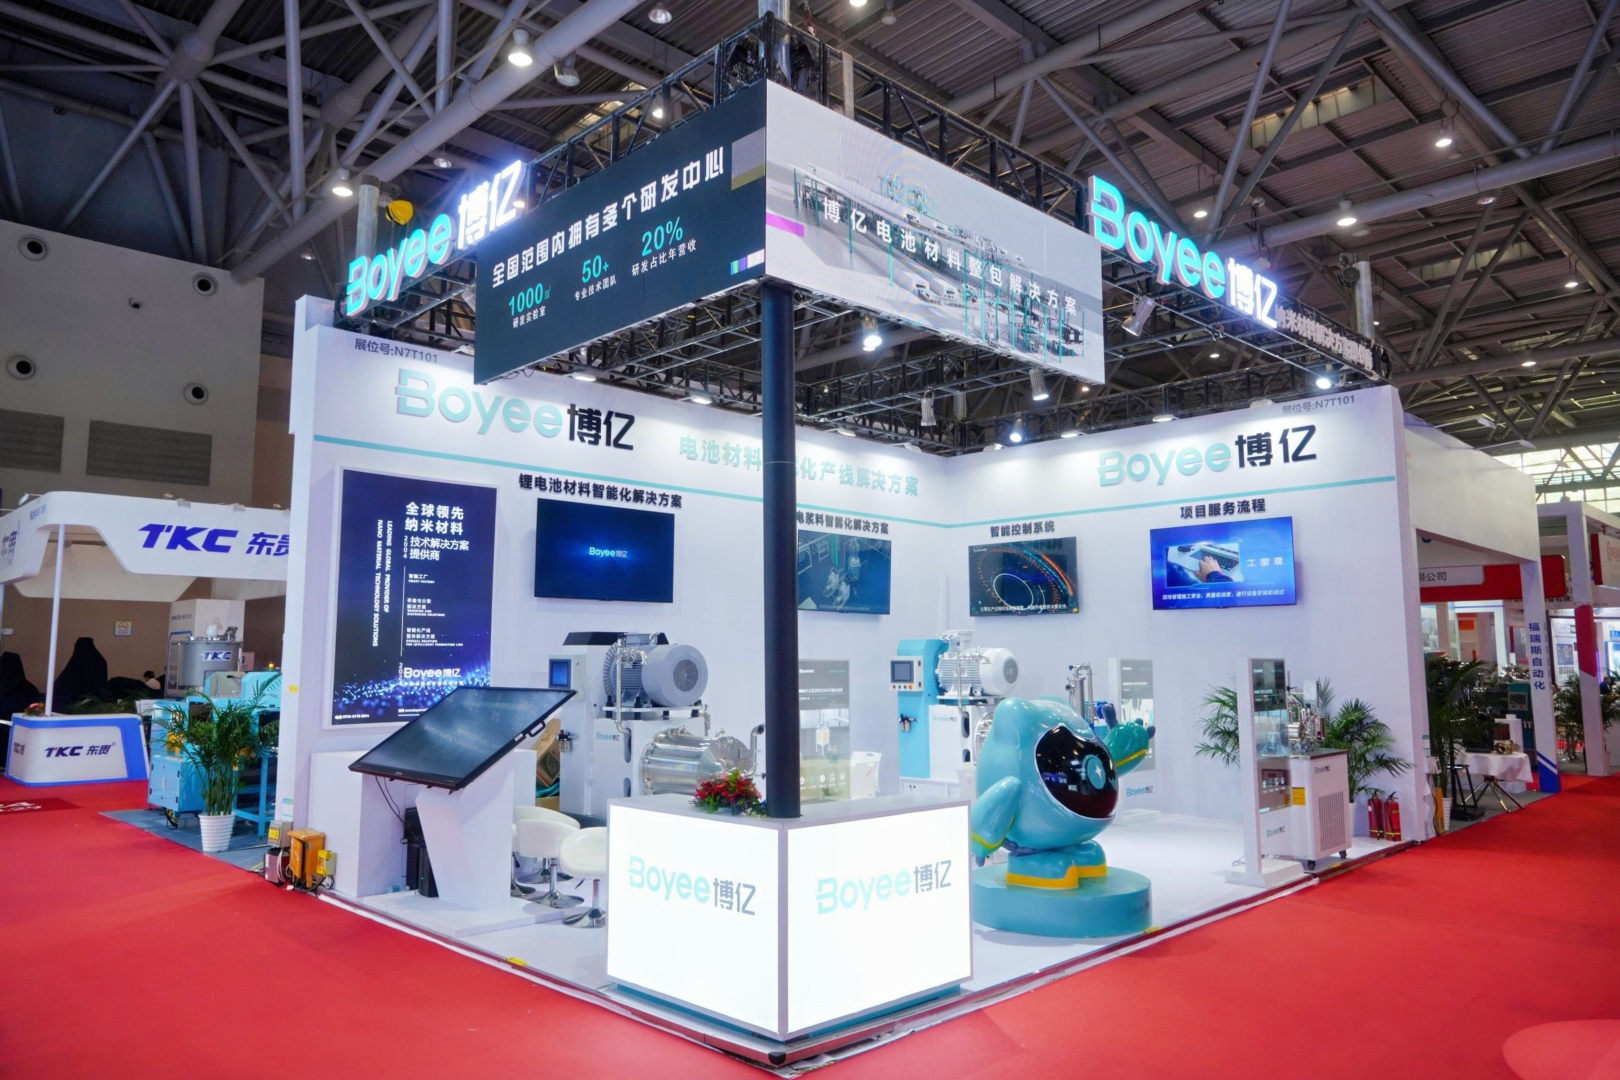 Boyee brought its cutting-edge technologies to Chongqing CIBF, our intelligent production line of lithium battery materials became the focus.